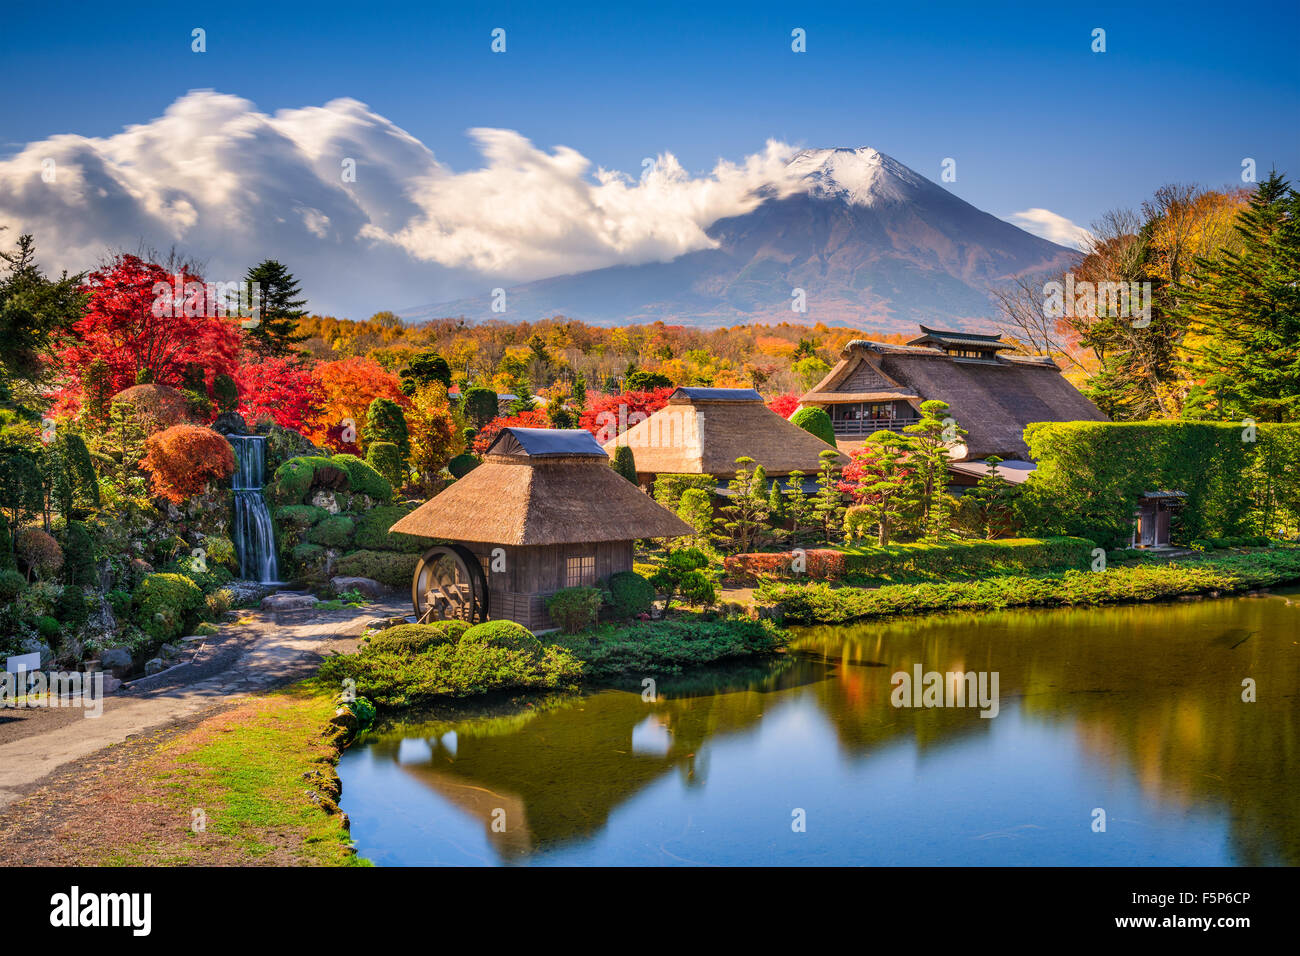 Oshino, Japan historic thatch houses with Mt. Fuji in the background. Stock Photo